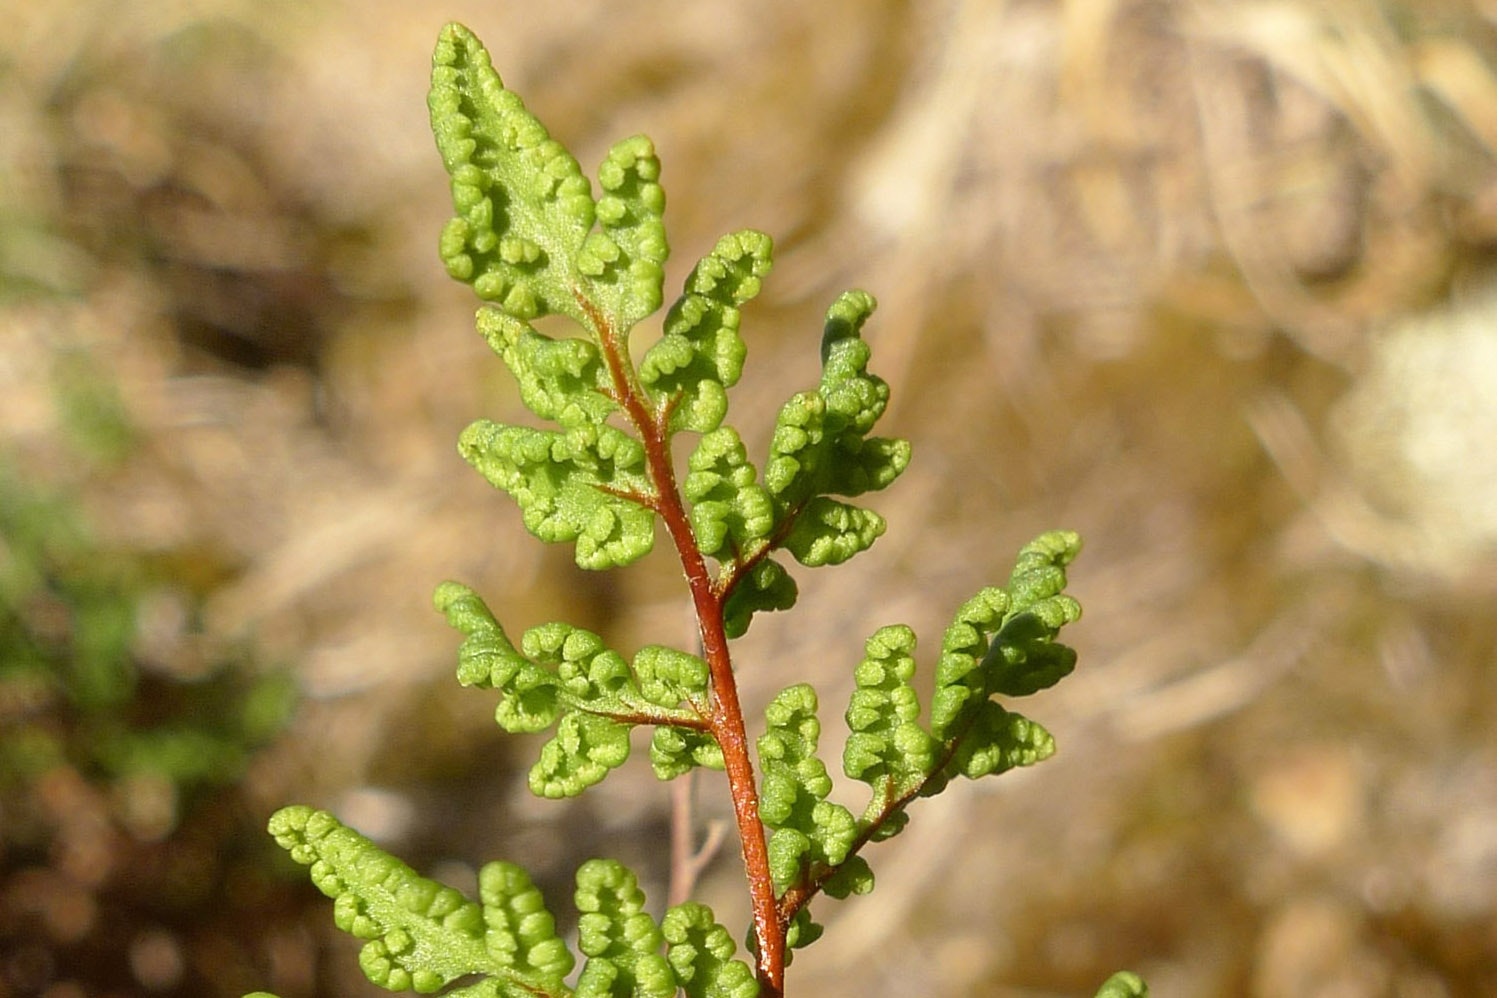 The tip of a fern frond with grasslands in the background